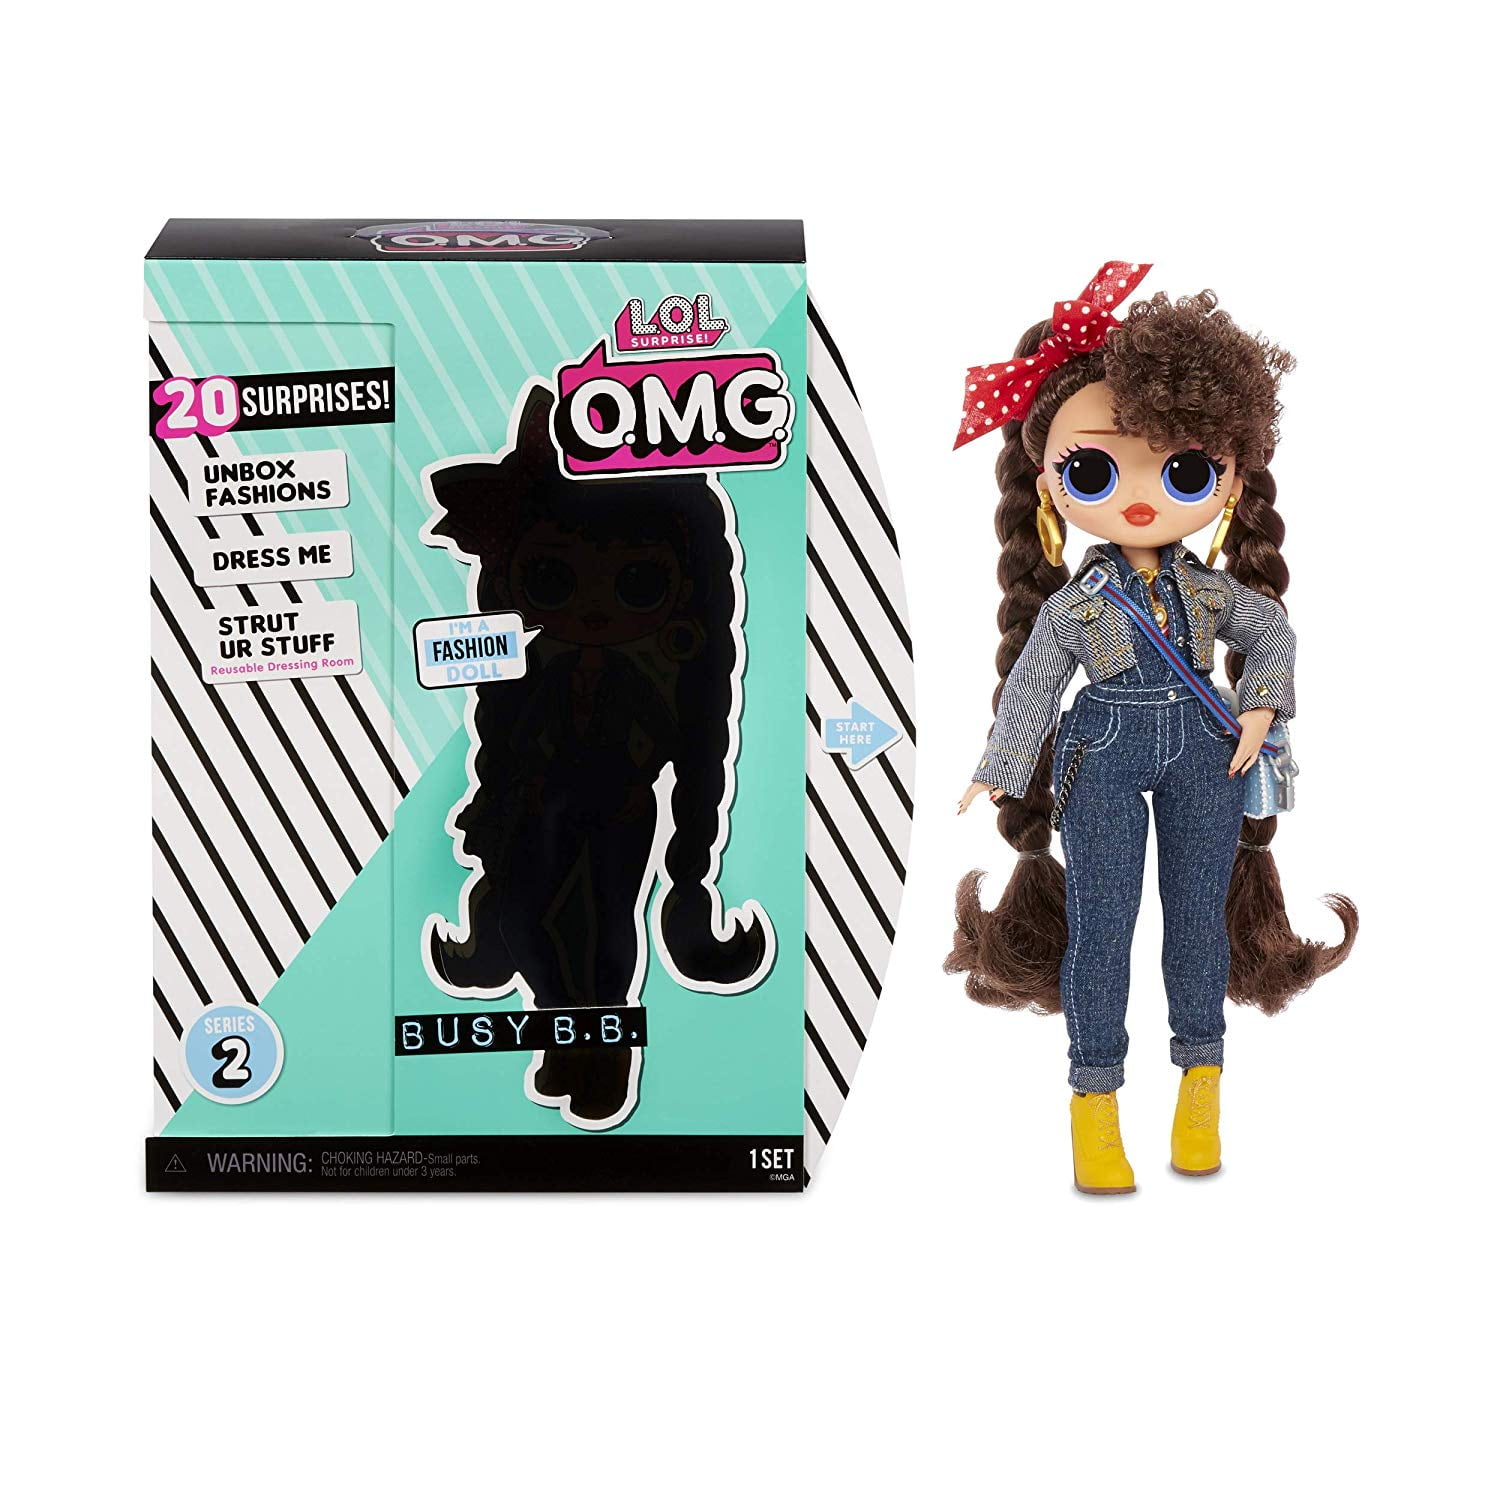 Miss Independent 10.6 inch Fashion Doll 565130E7C for sale online O.M.G Surprise L.O.L 